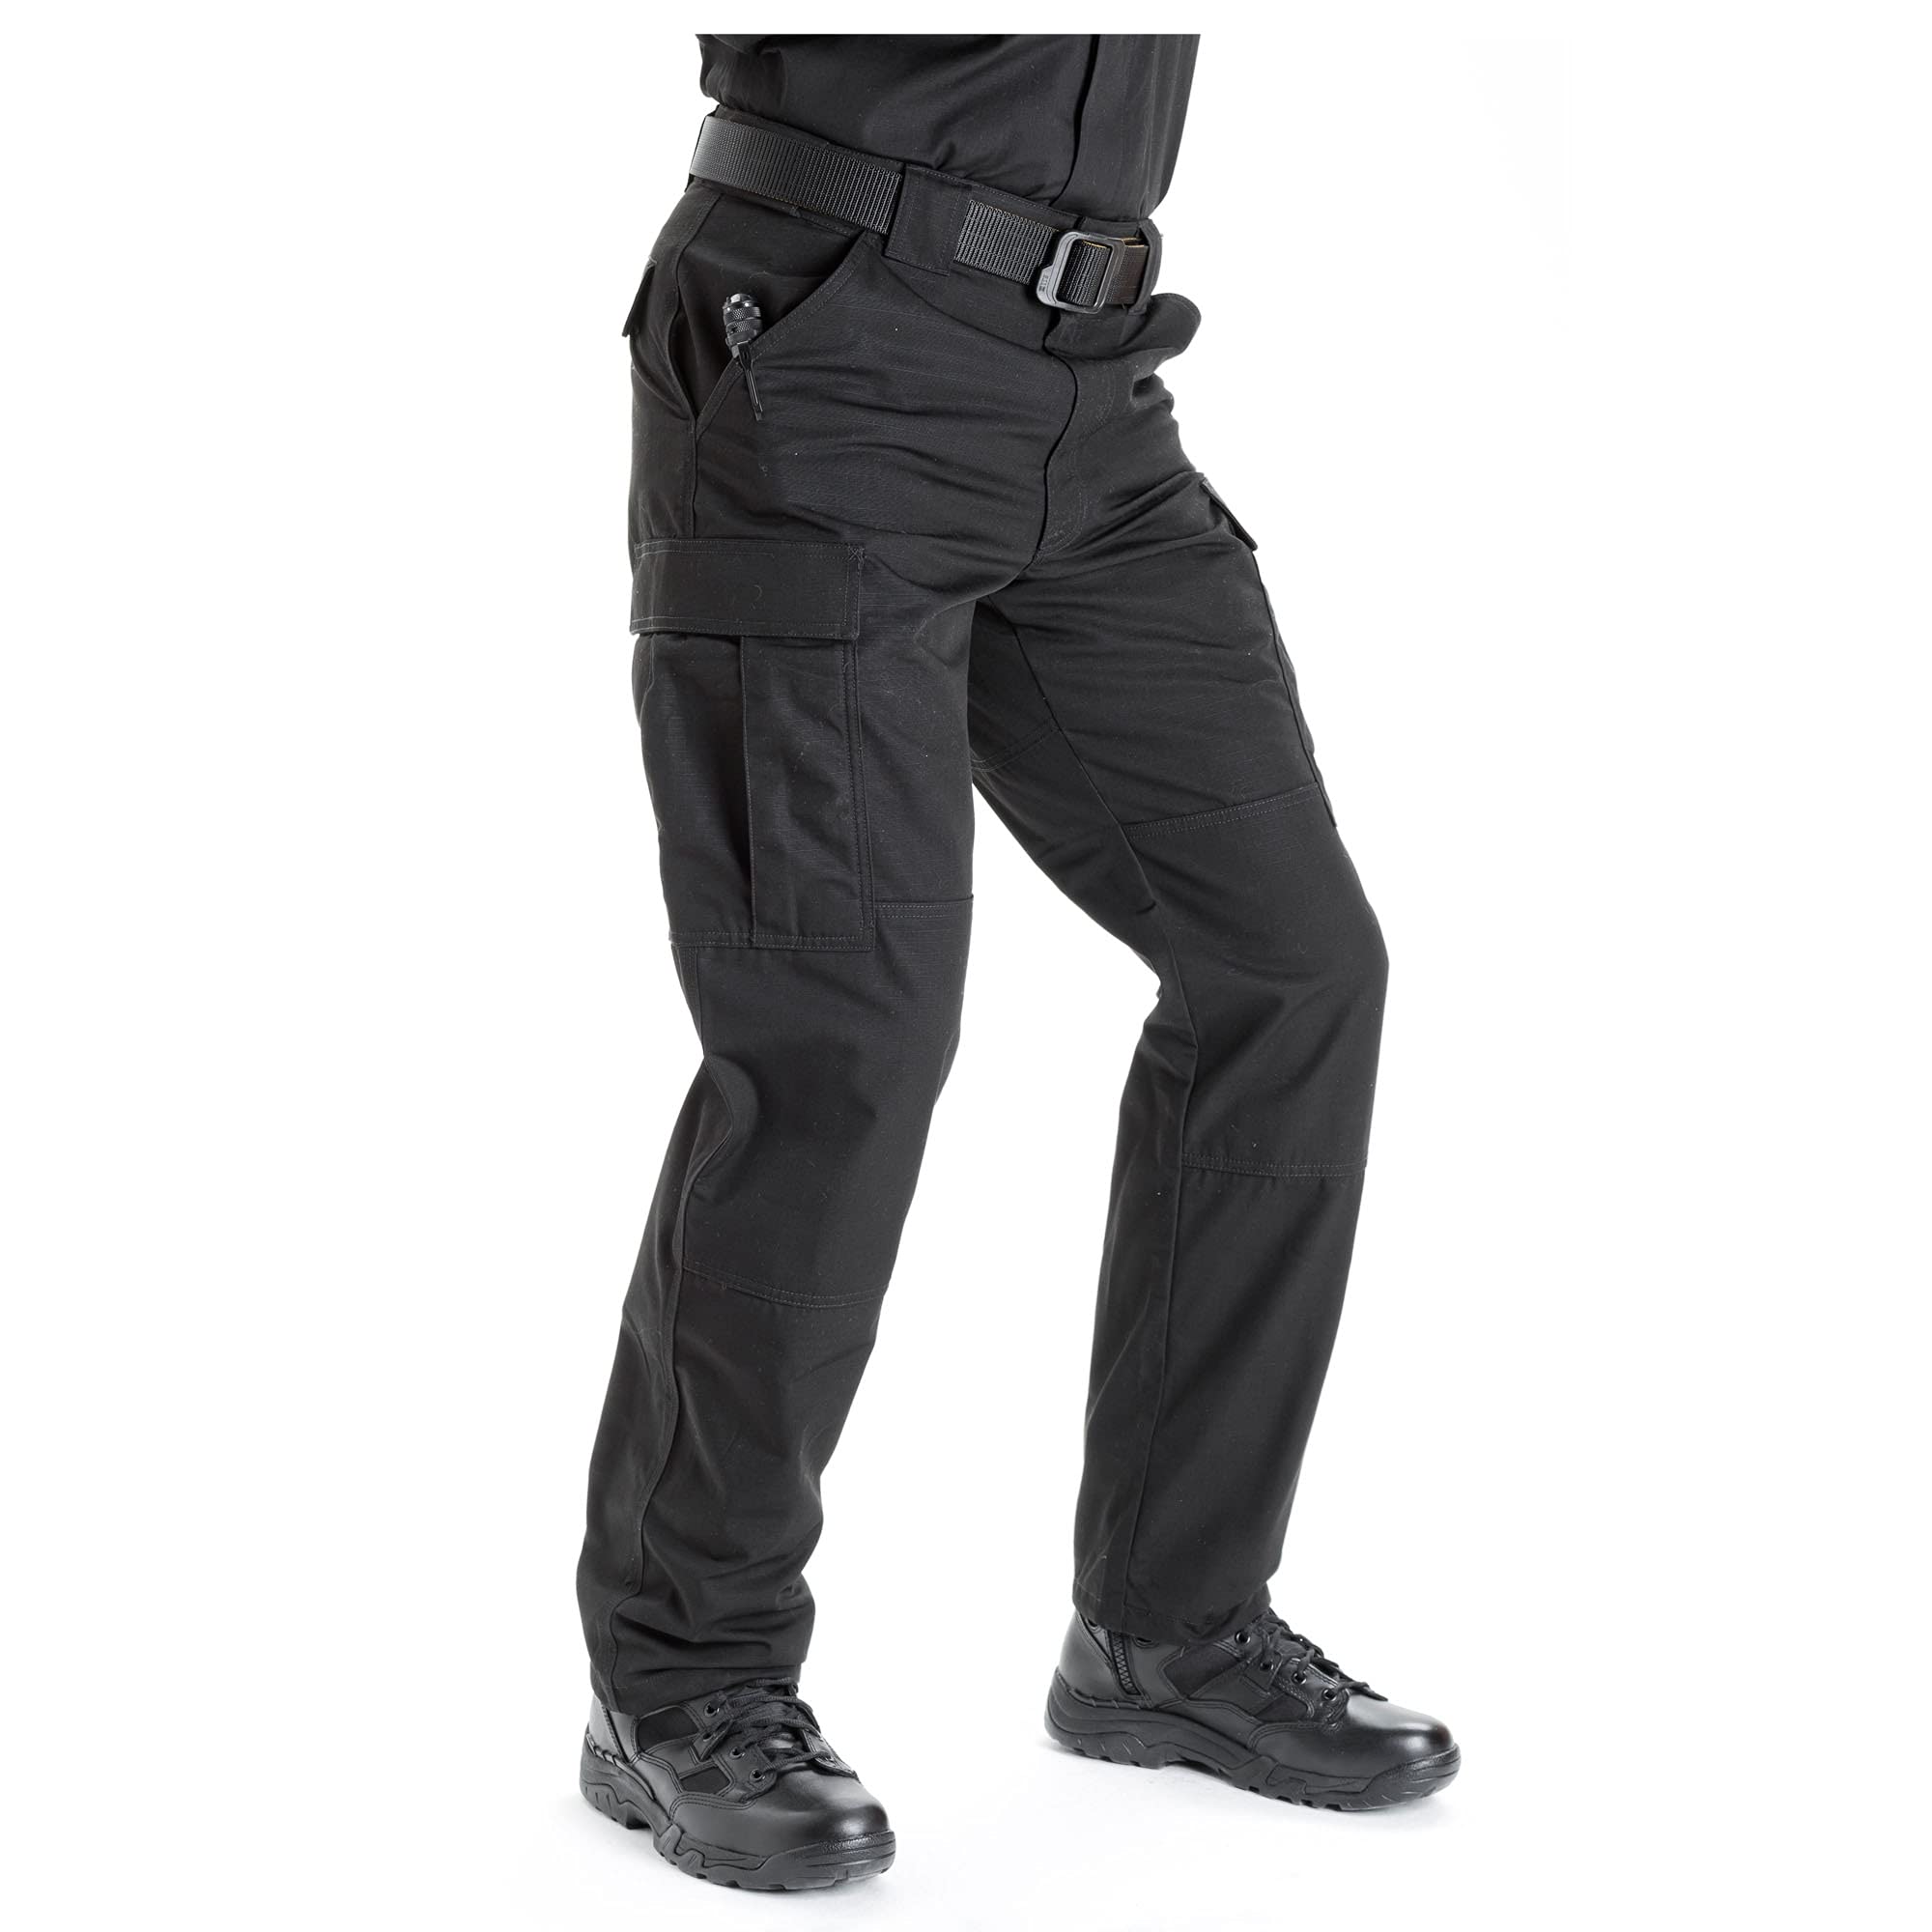 NYPD TARU 5.11 Tactical Stryke Pants - Emergency Responder Products